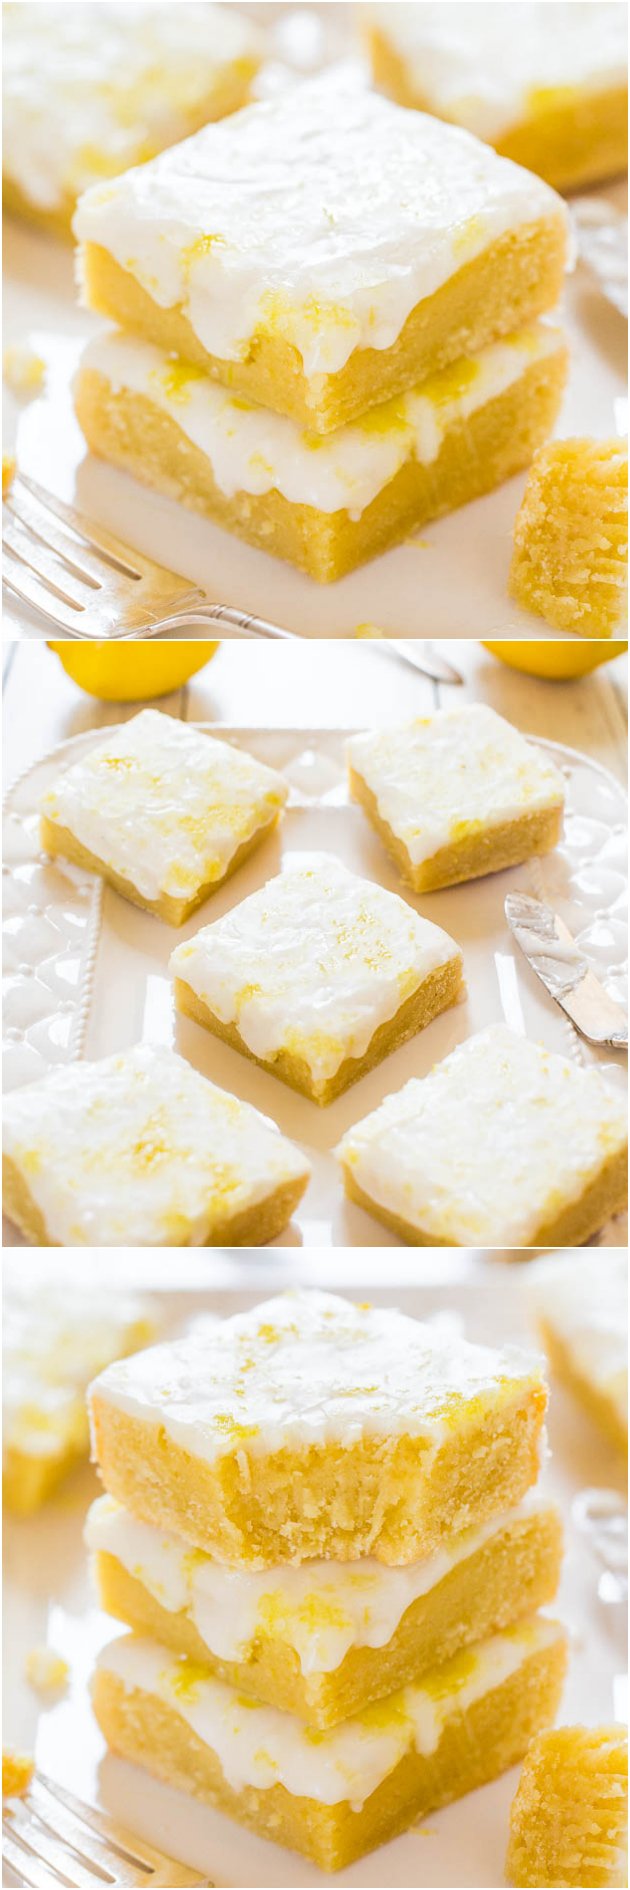  Lemon Lemonies - Like brownies, but made with lemon and white chocolate! Dense, chewy, not cakey and packed with big, bold lemon flavor!